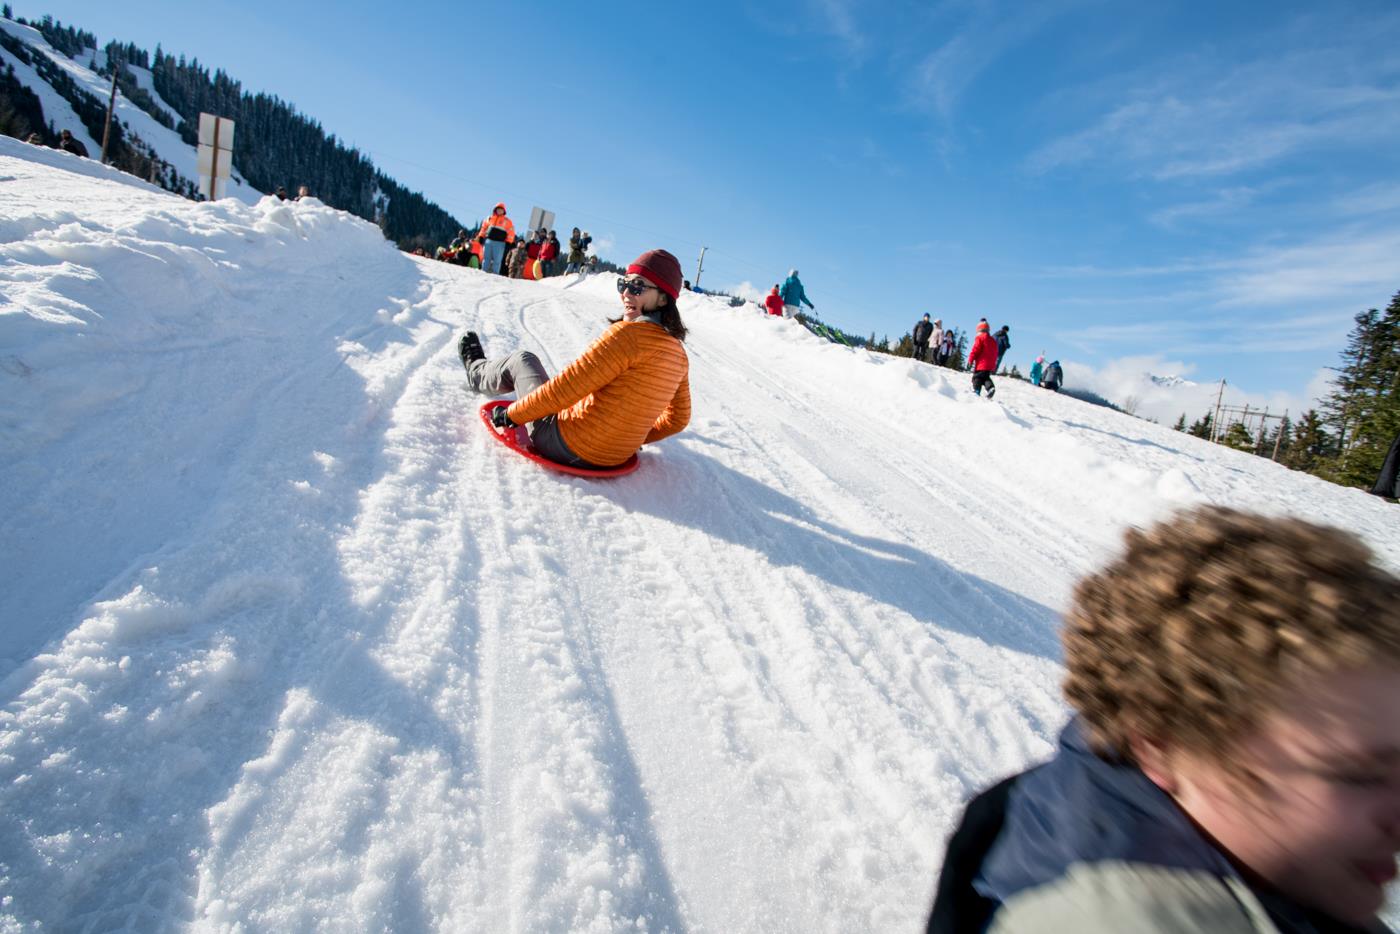 ICO Seattle leader and student sledding at Snoqualmie Pass